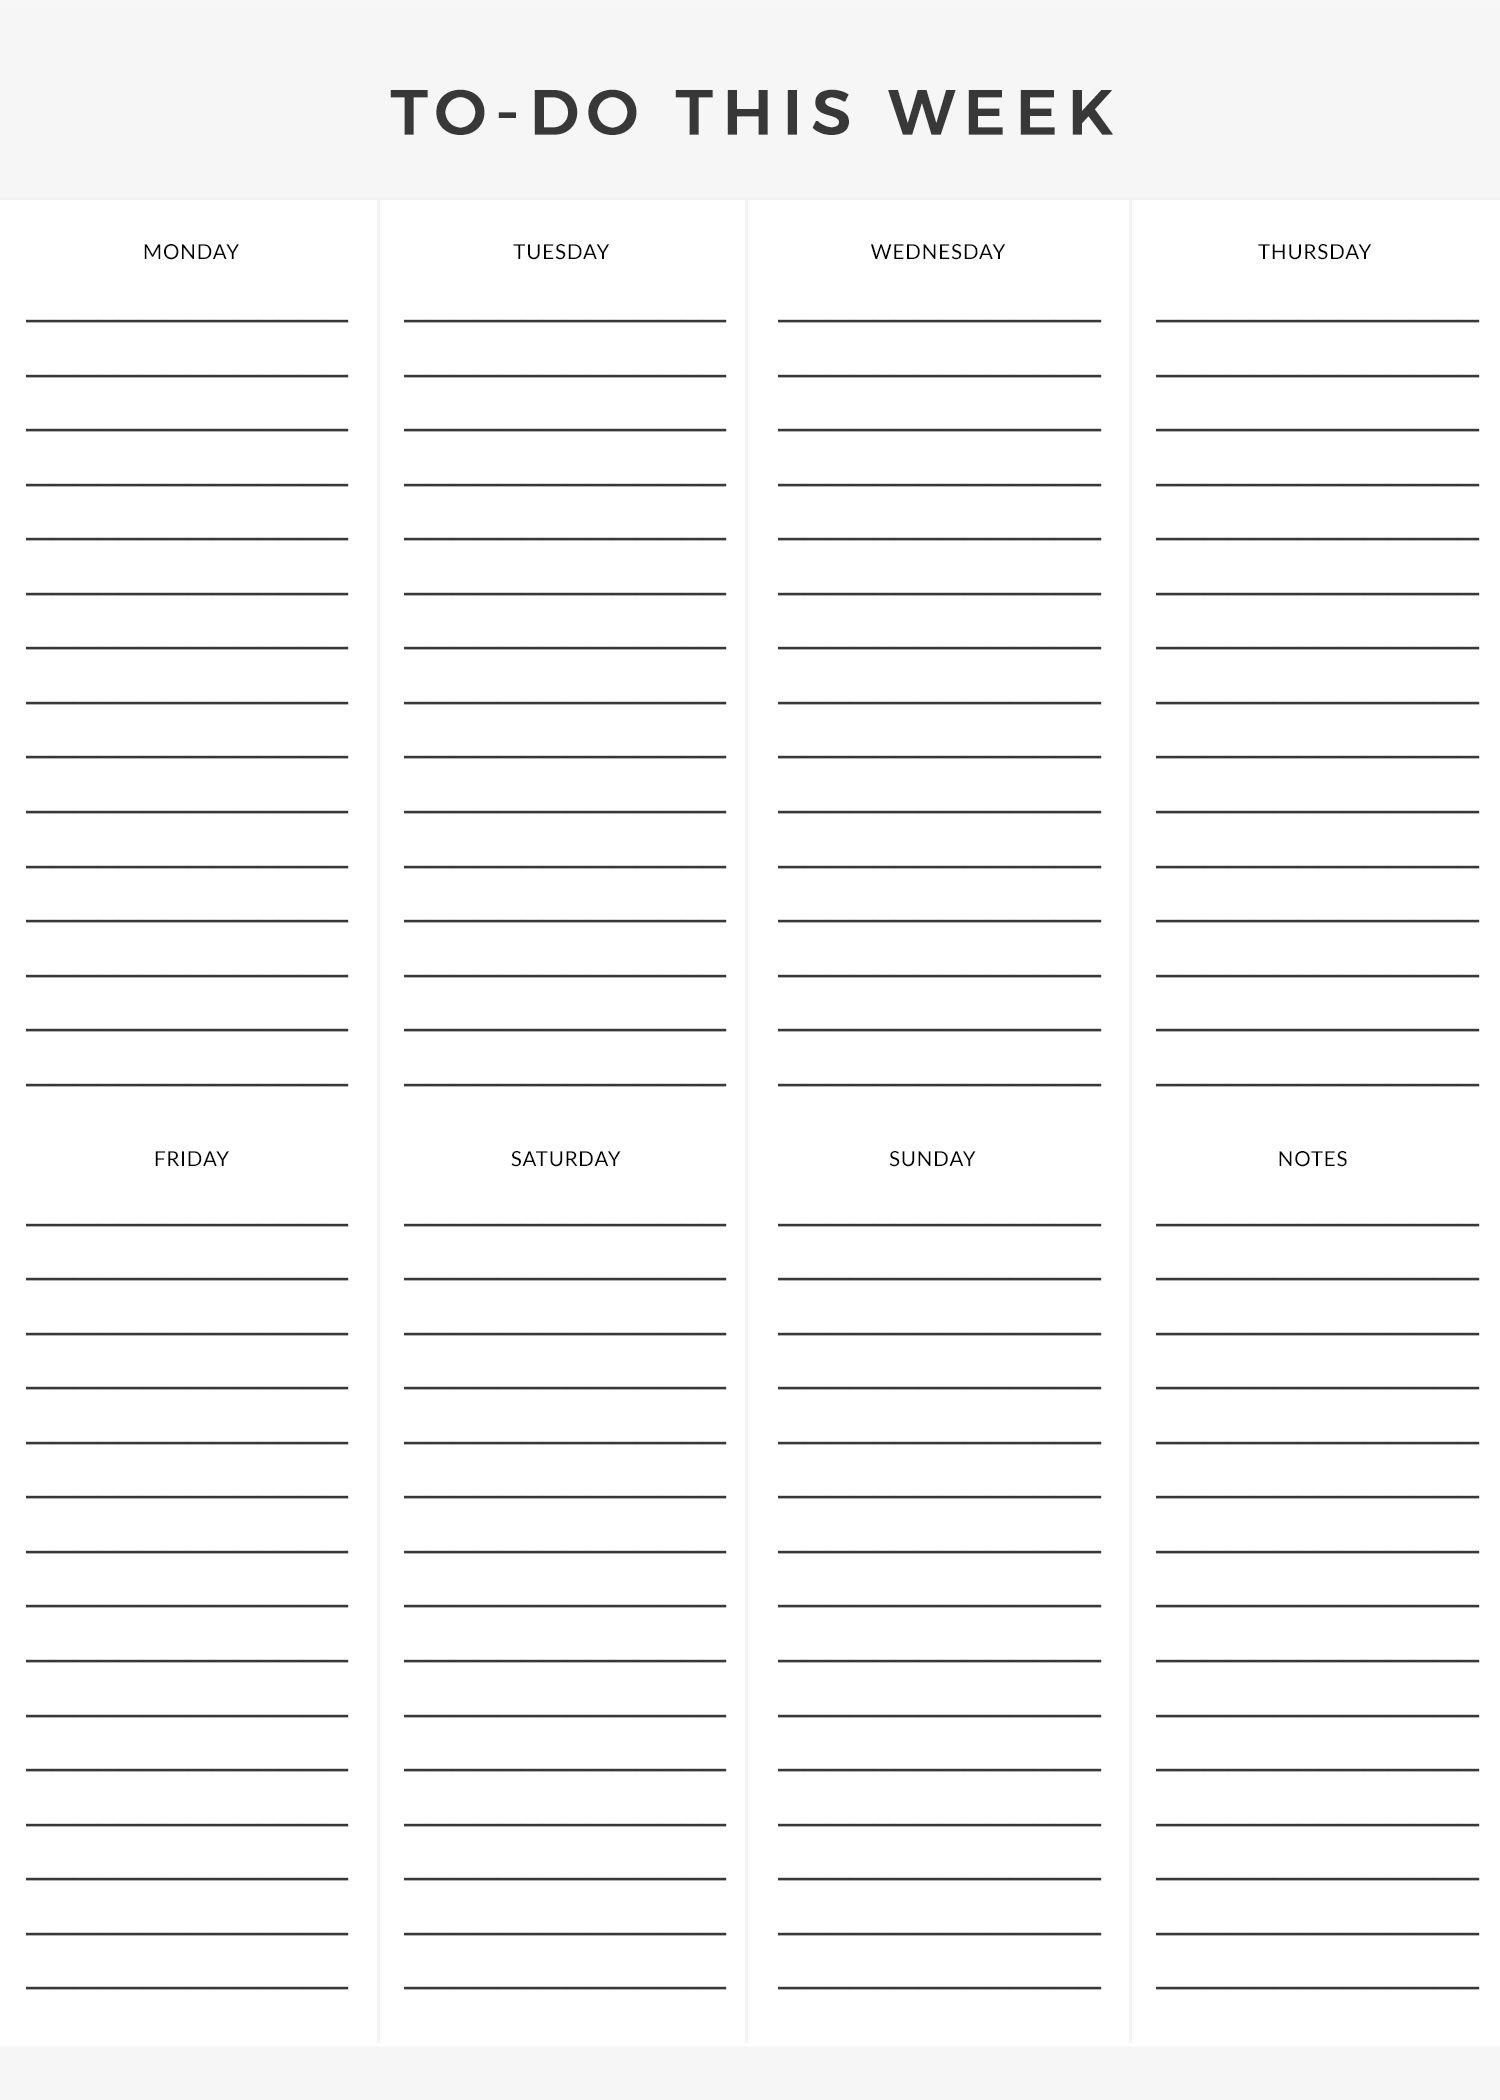 Free Printable Weekly To Do List